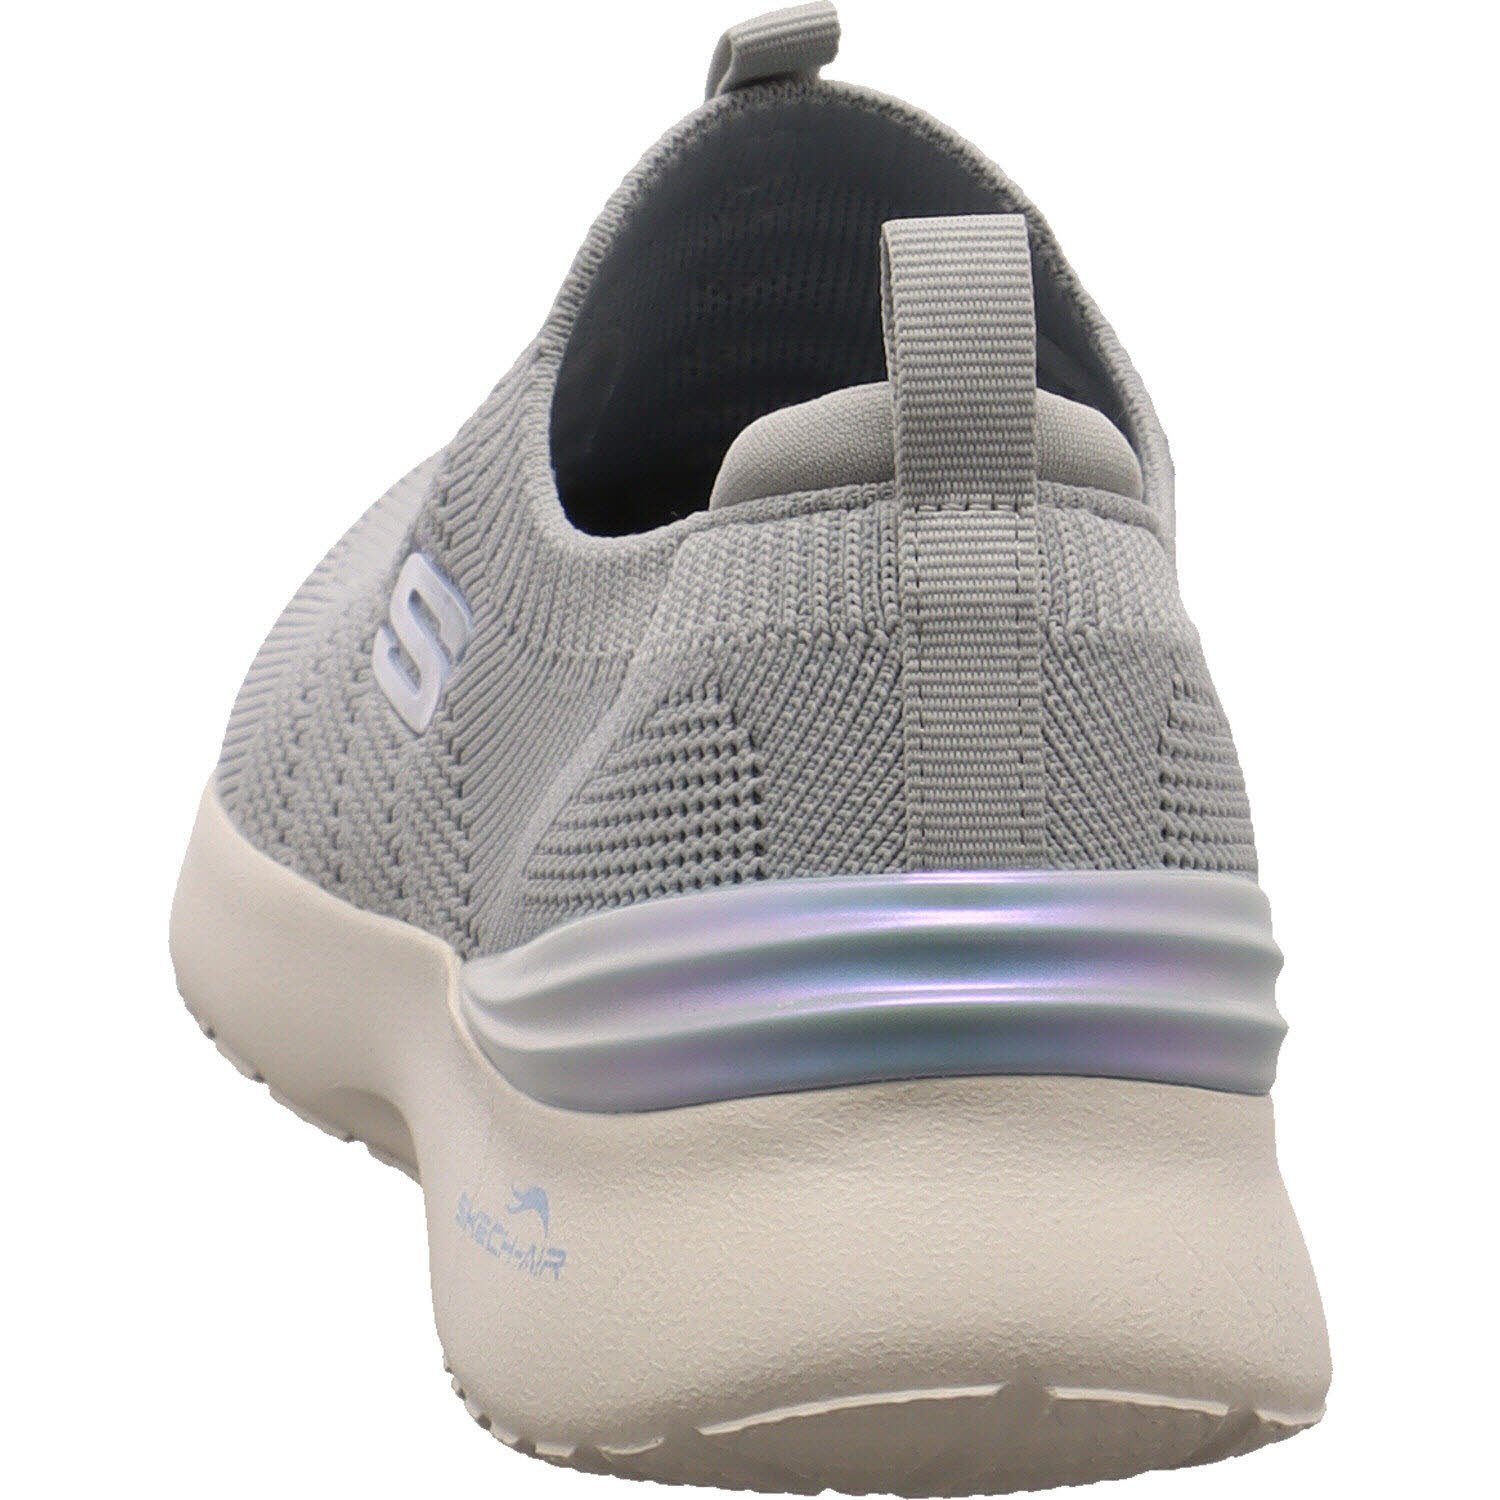 Slipper Dynamight Perfects - Skech-Air Skechers